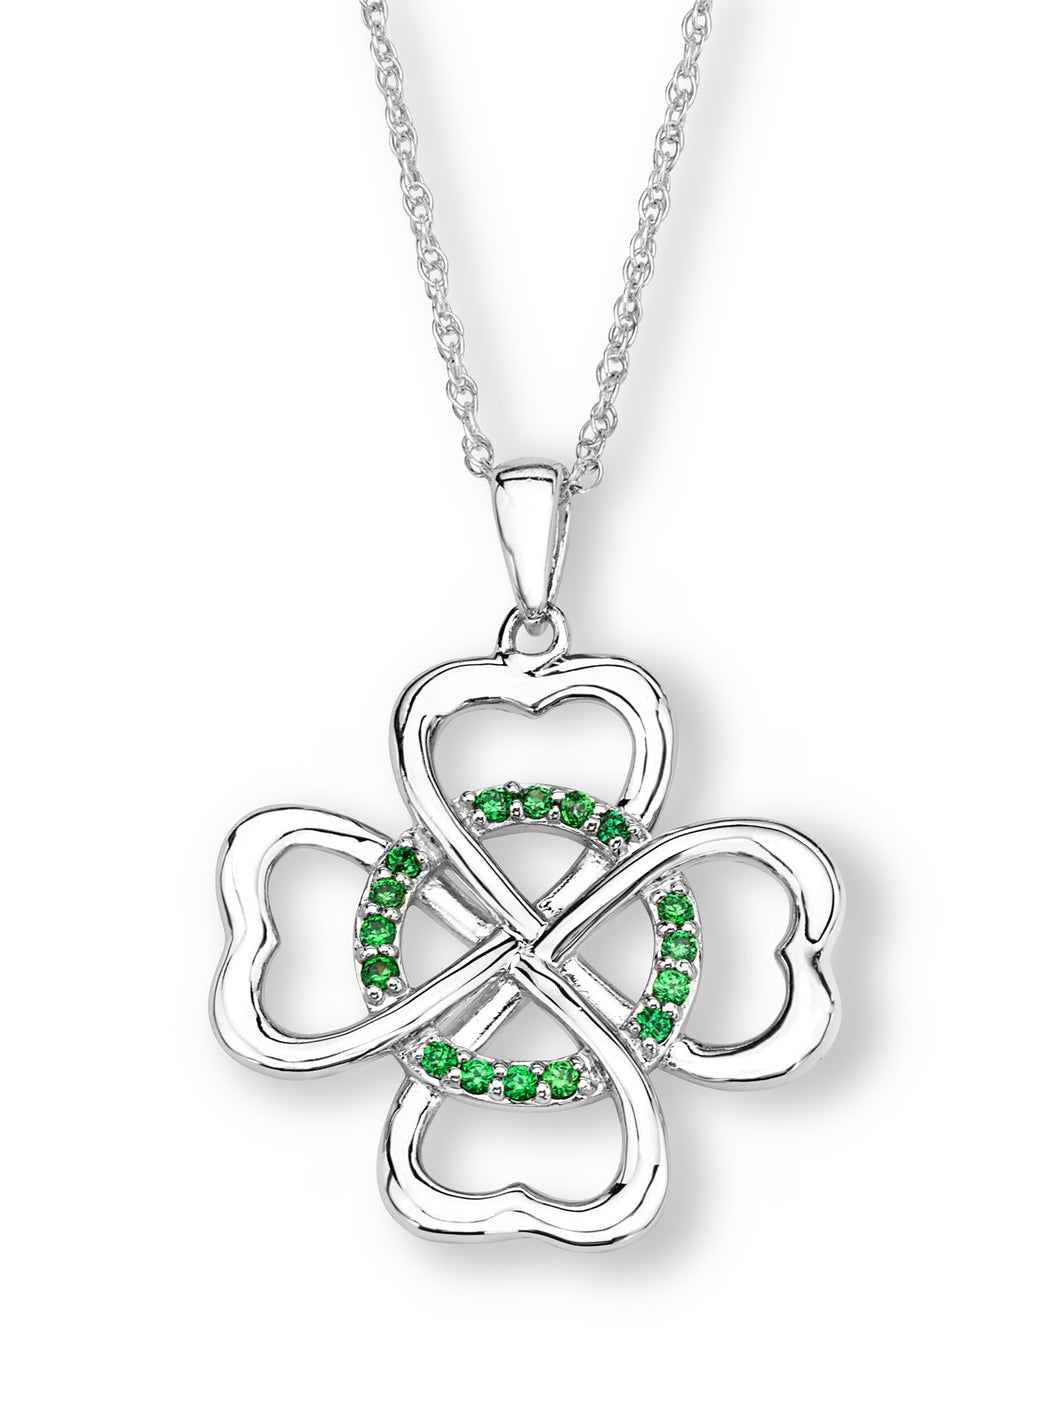 Green CZ Four Leaf Clover Silver Necklace